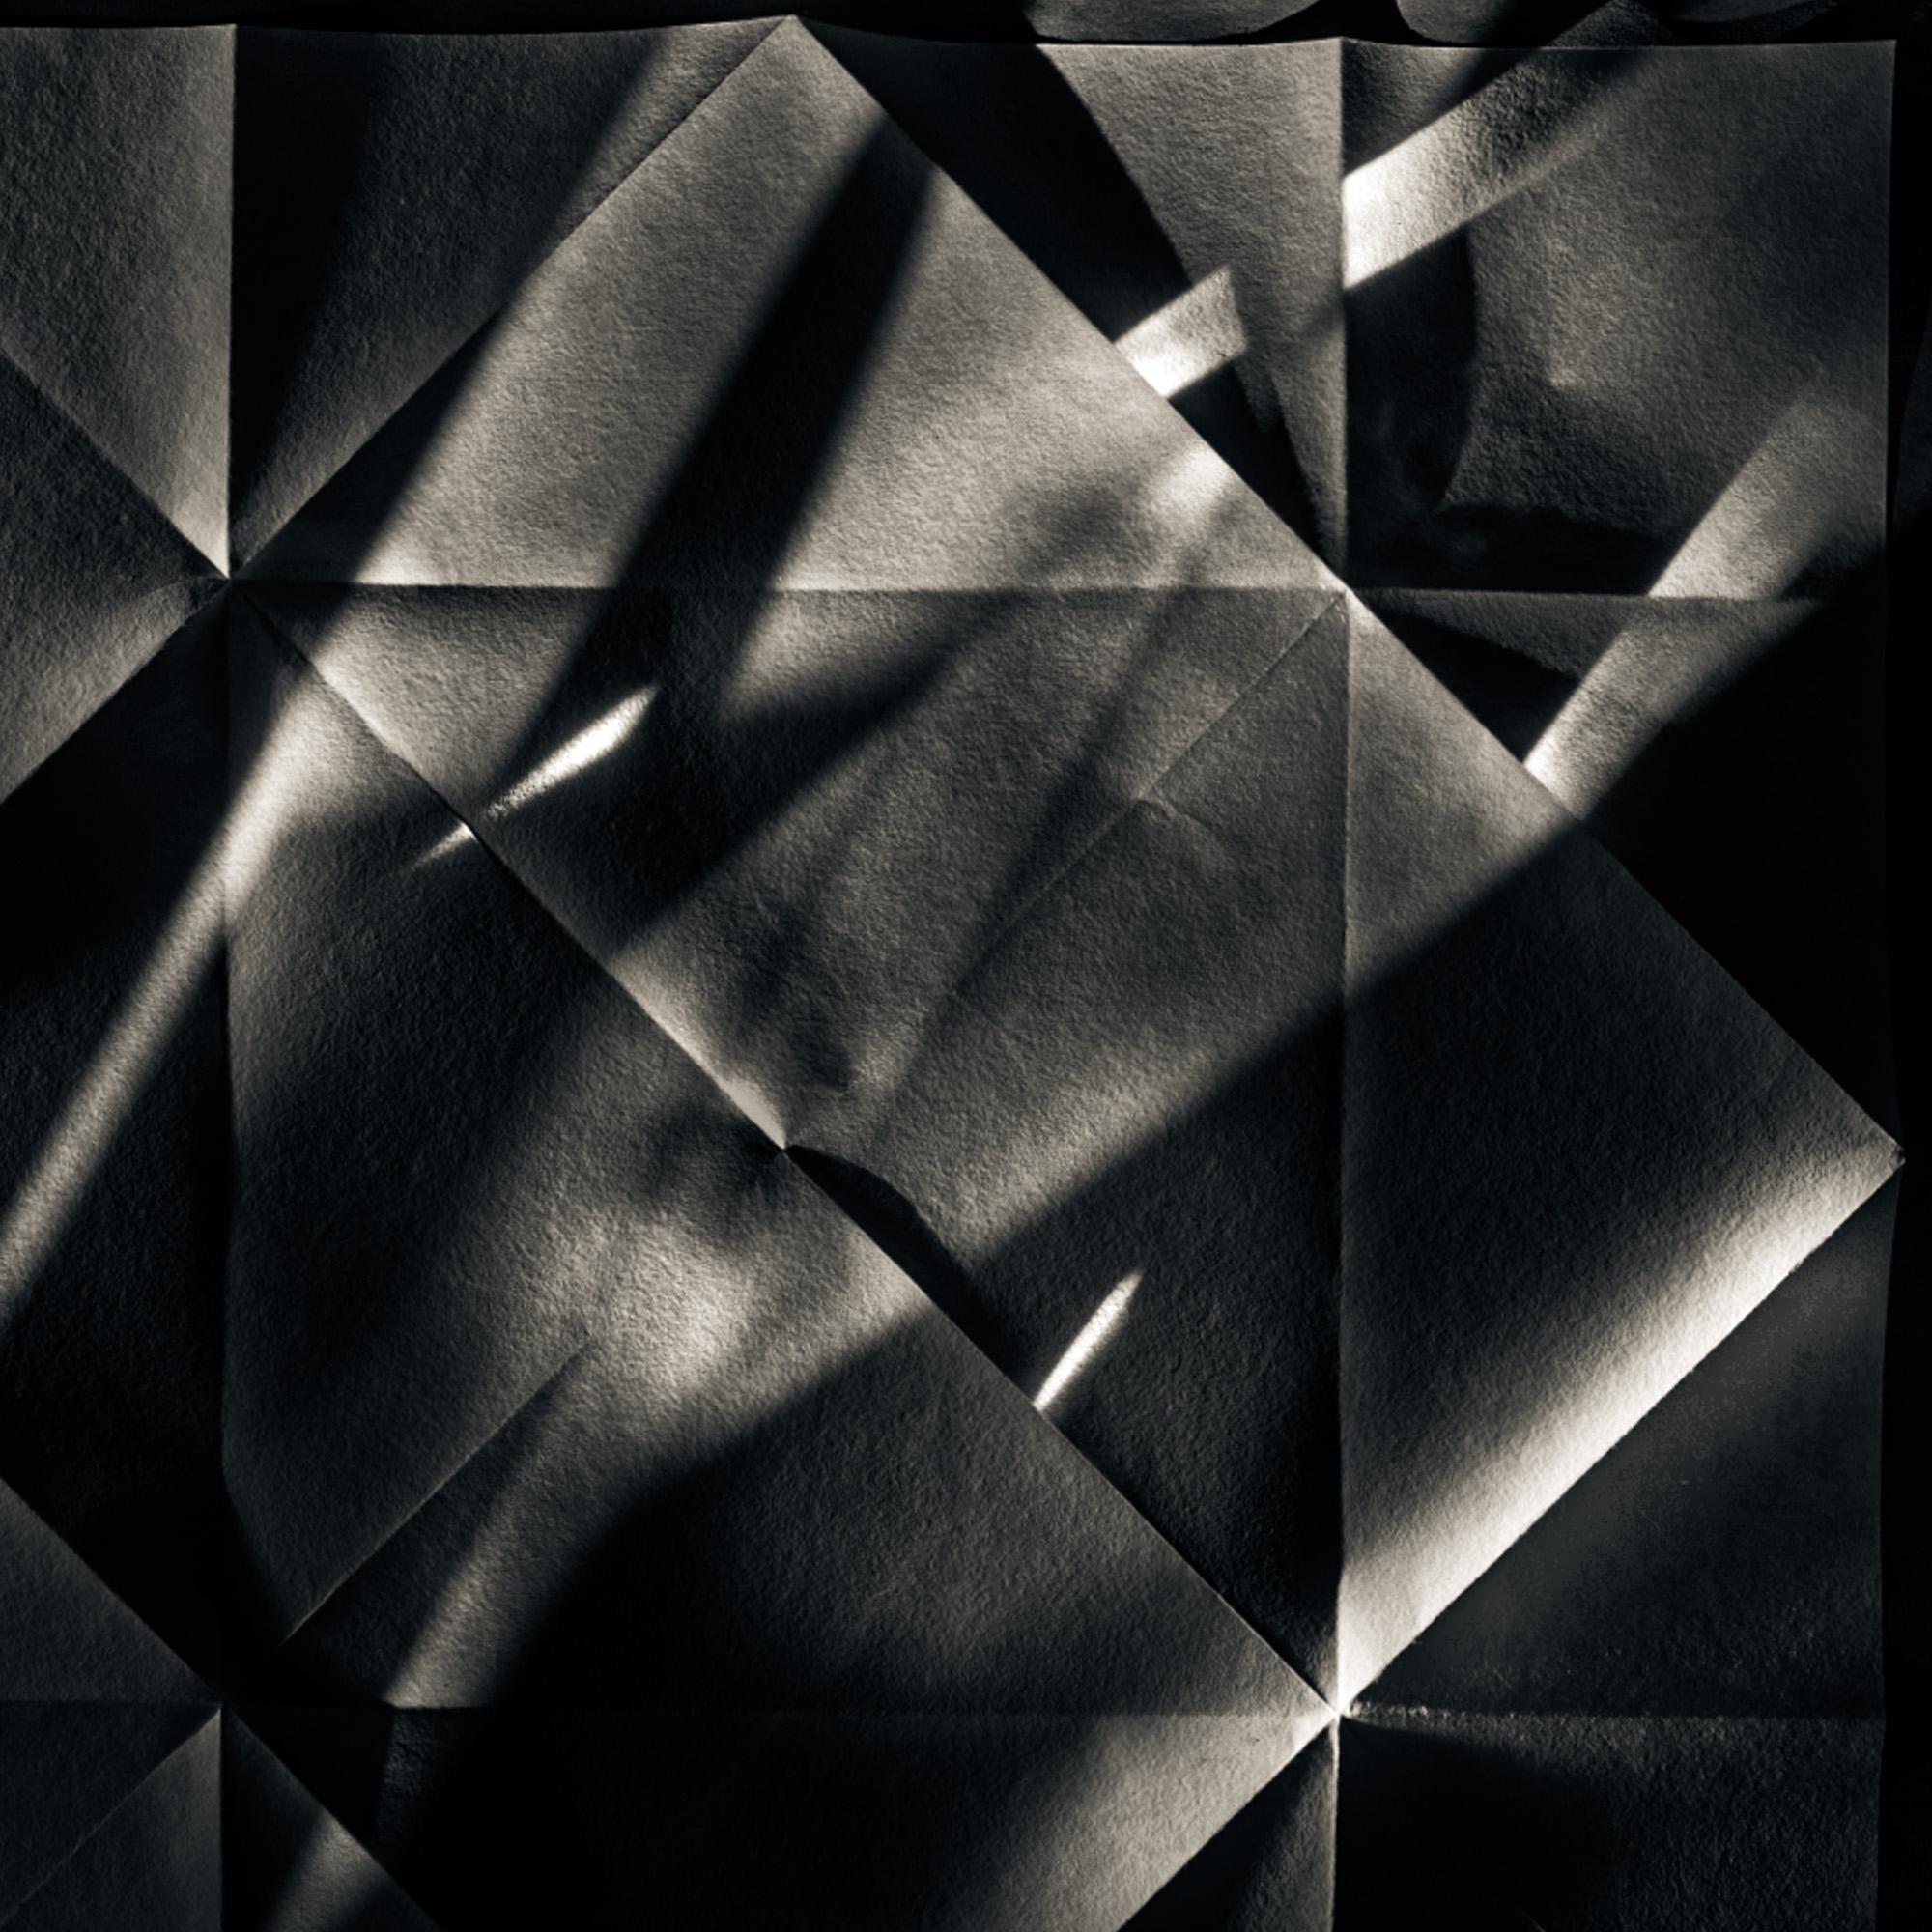  Abstract Photography Black and White - Origami Folds #37